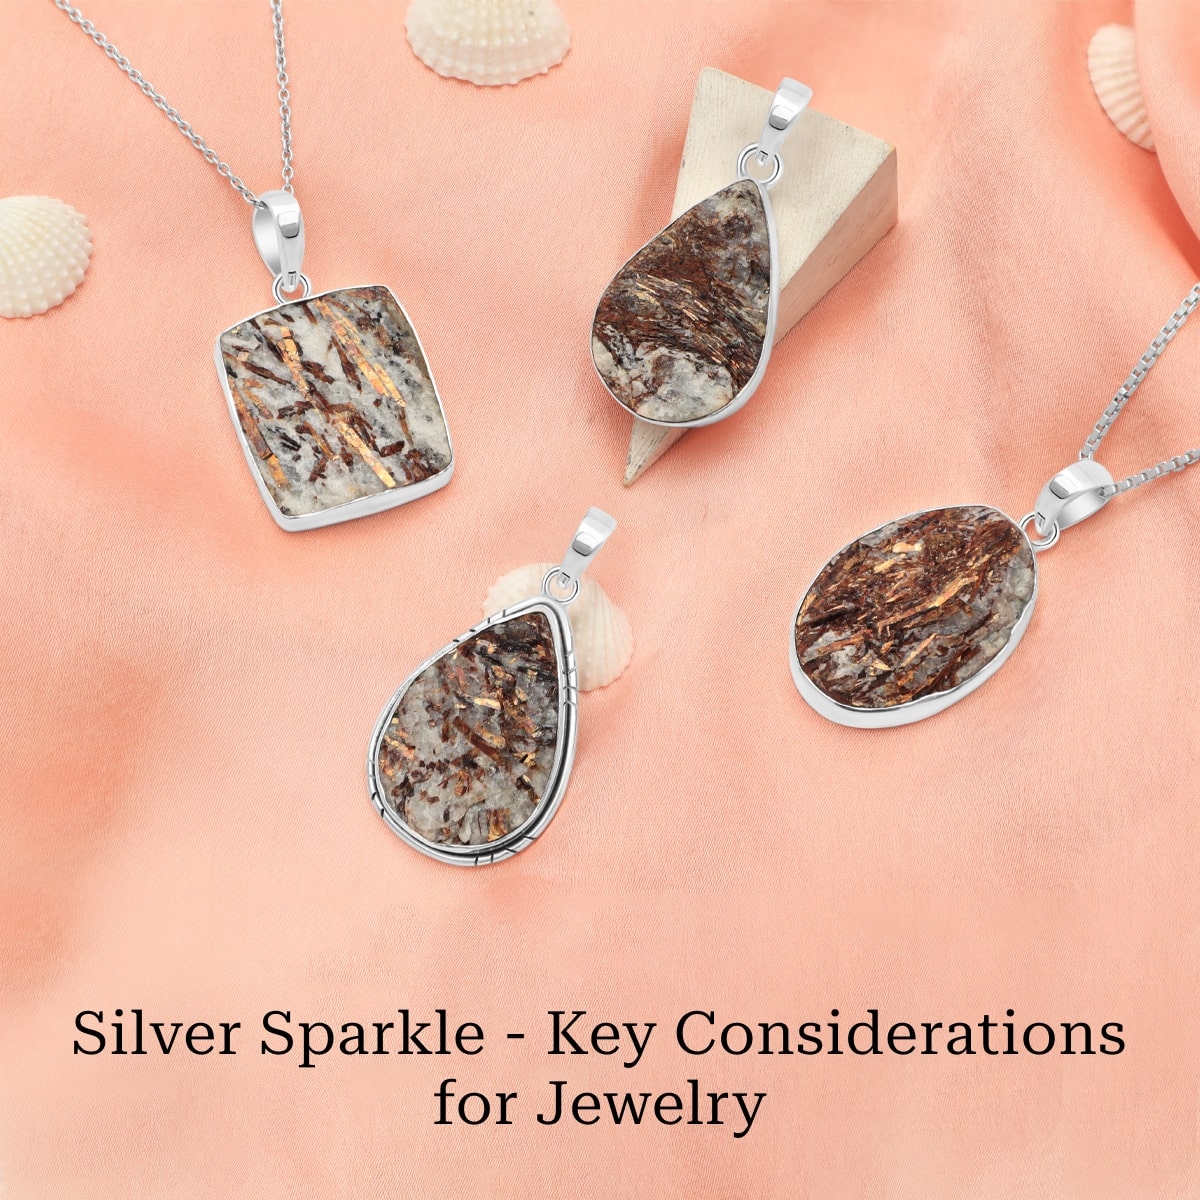 Things to Consider When Buying a Silver Jewelry